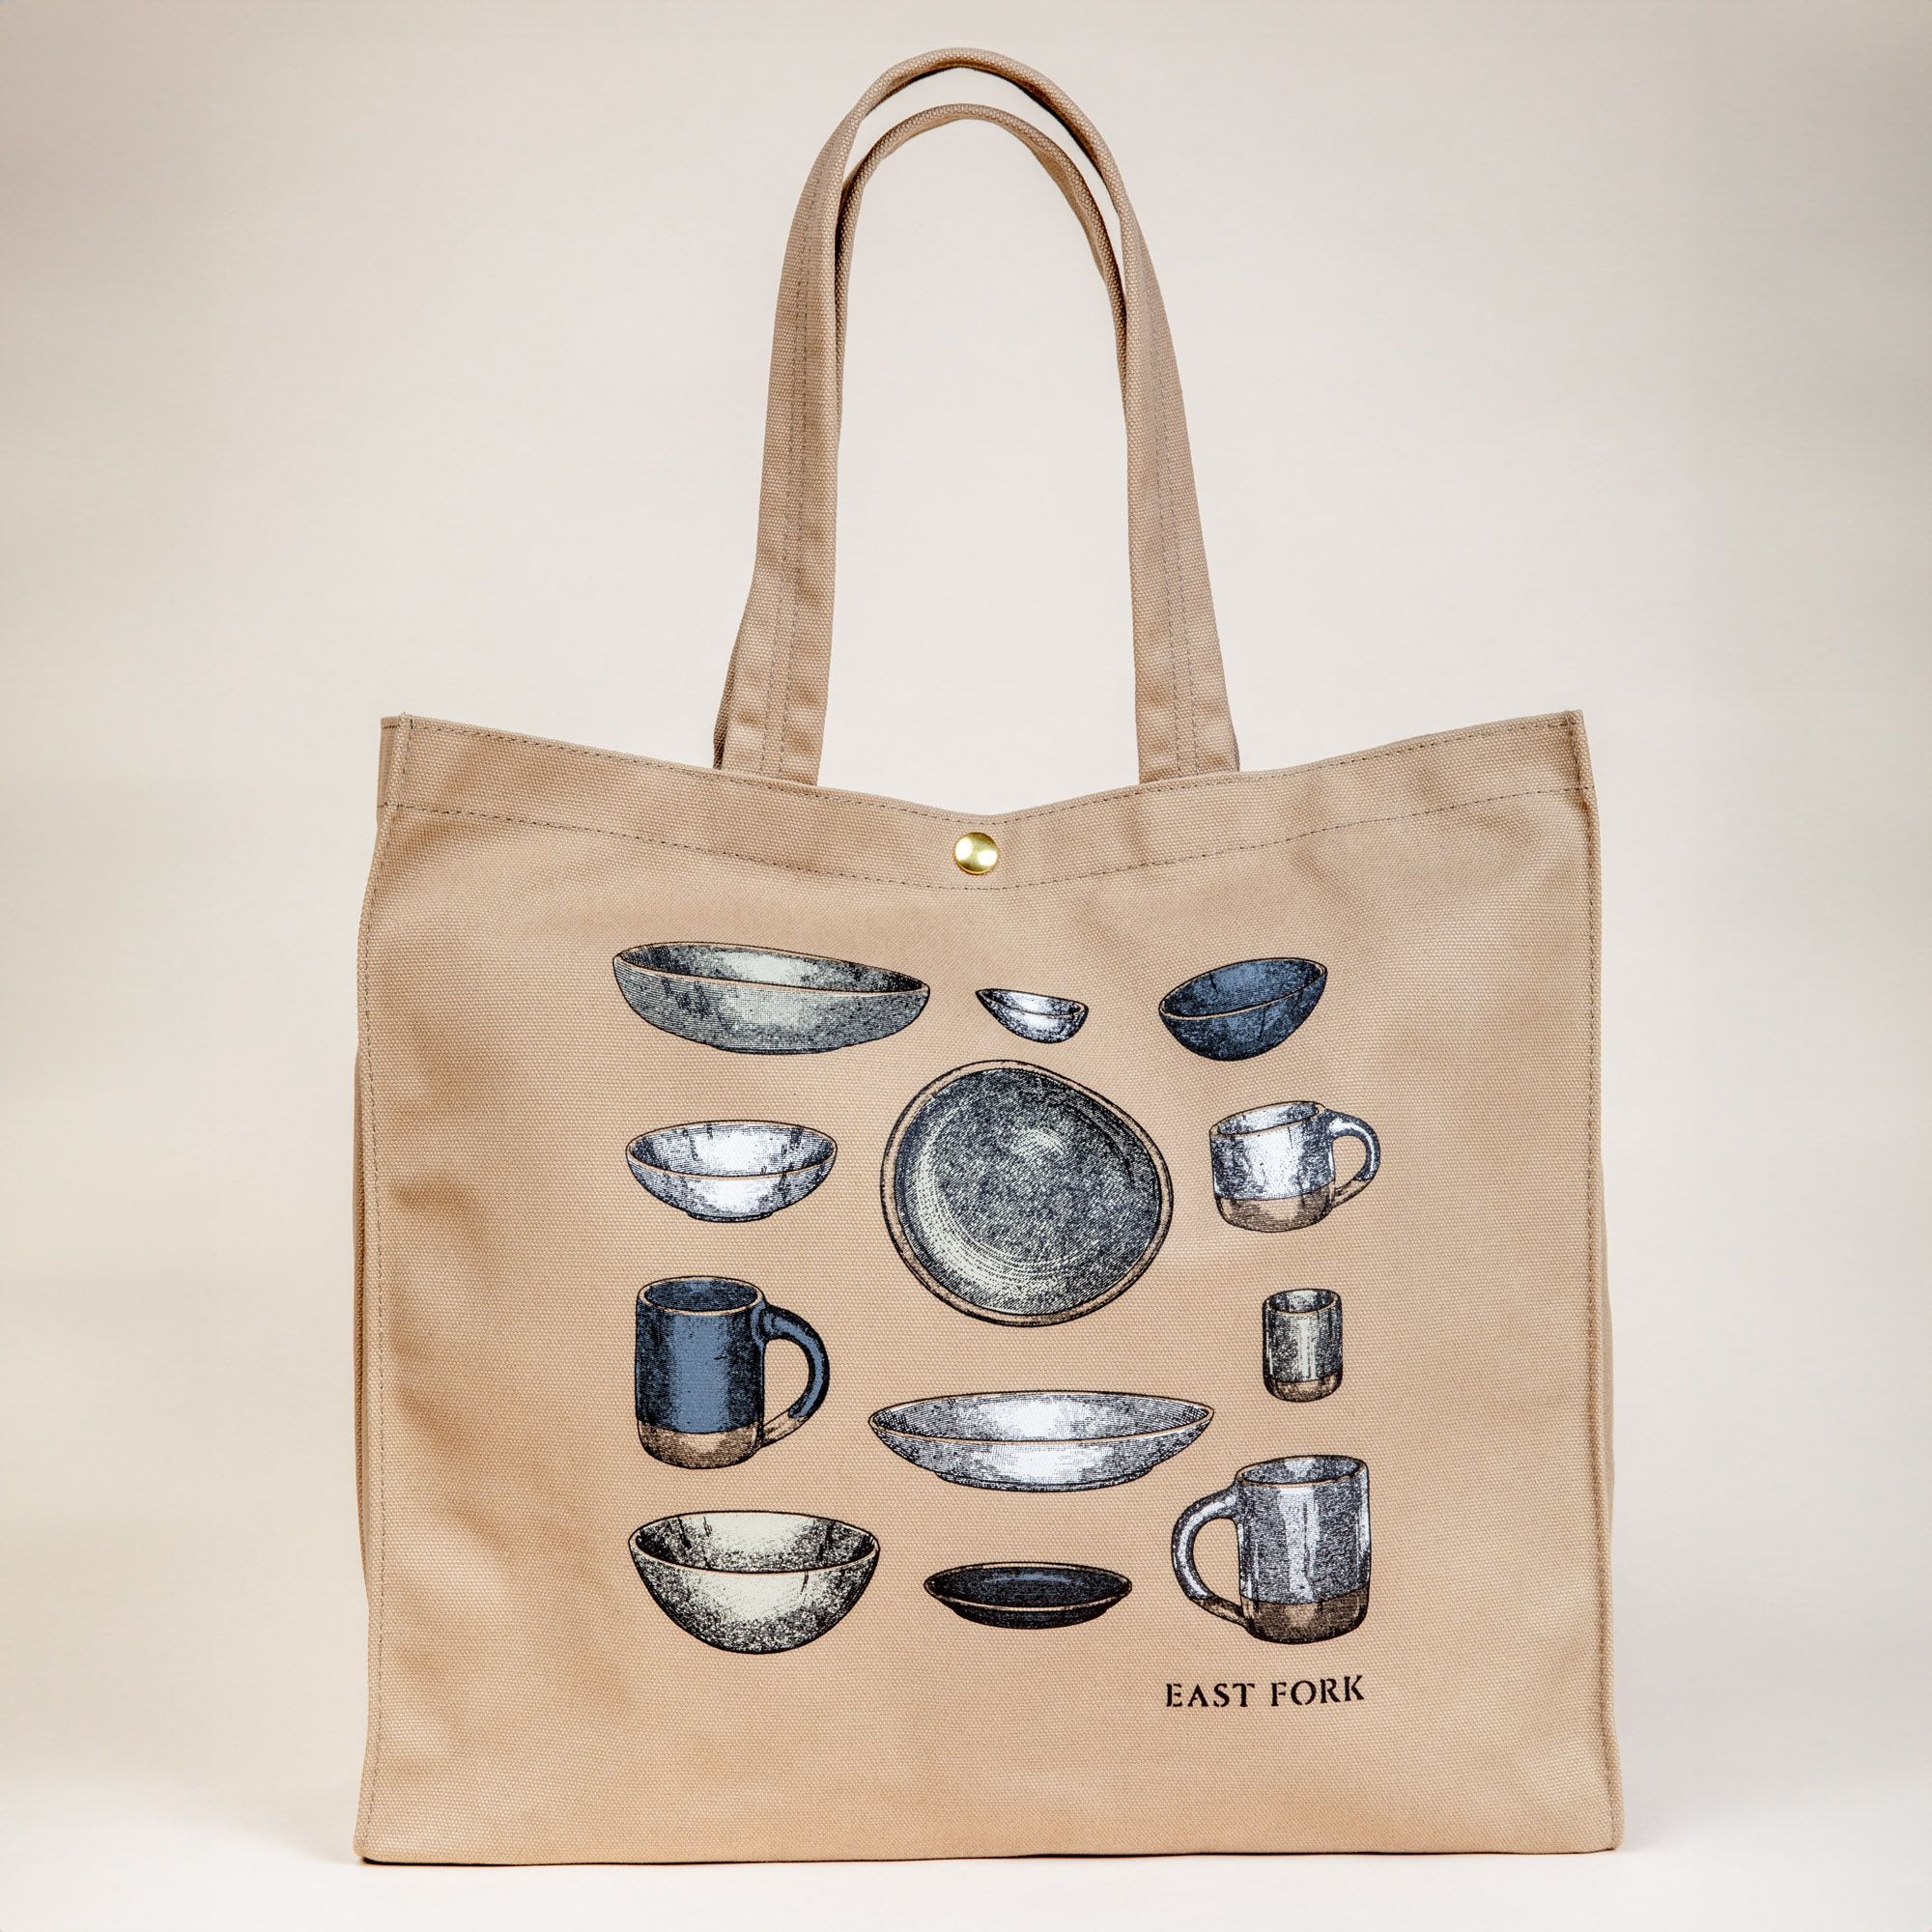 A sturdy canvas tan tote bag with handles and a metal closure button at the top. On the bag is a printed illustration in neutral colors of bowls, plates, and mugs.